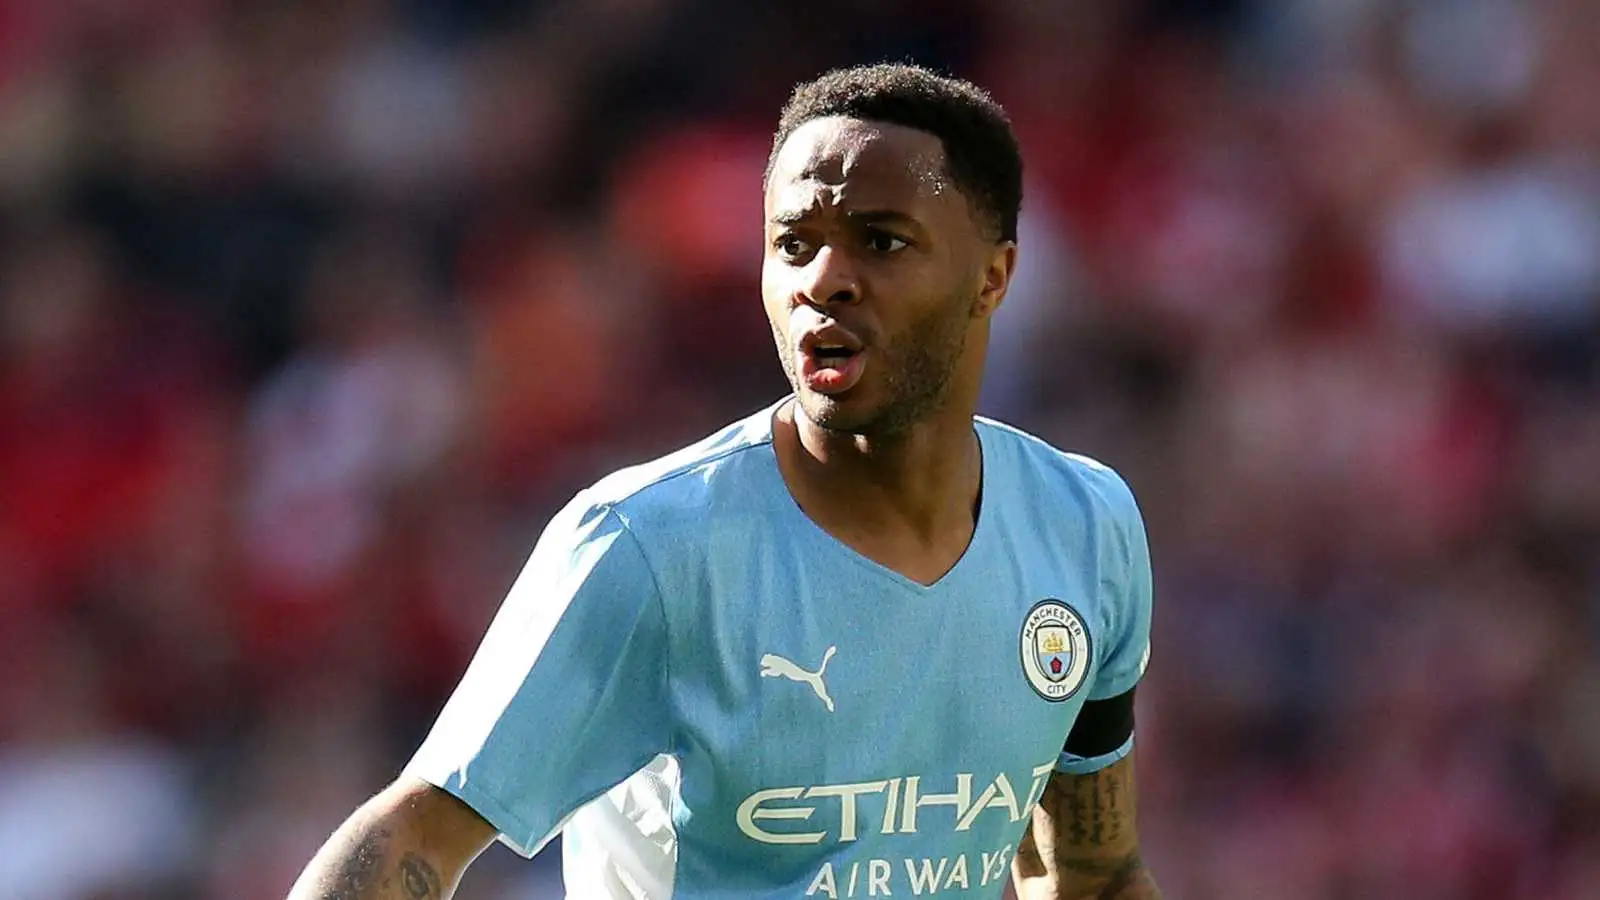 BREAKING: Chelsea are confident of signing Sterling from Man City